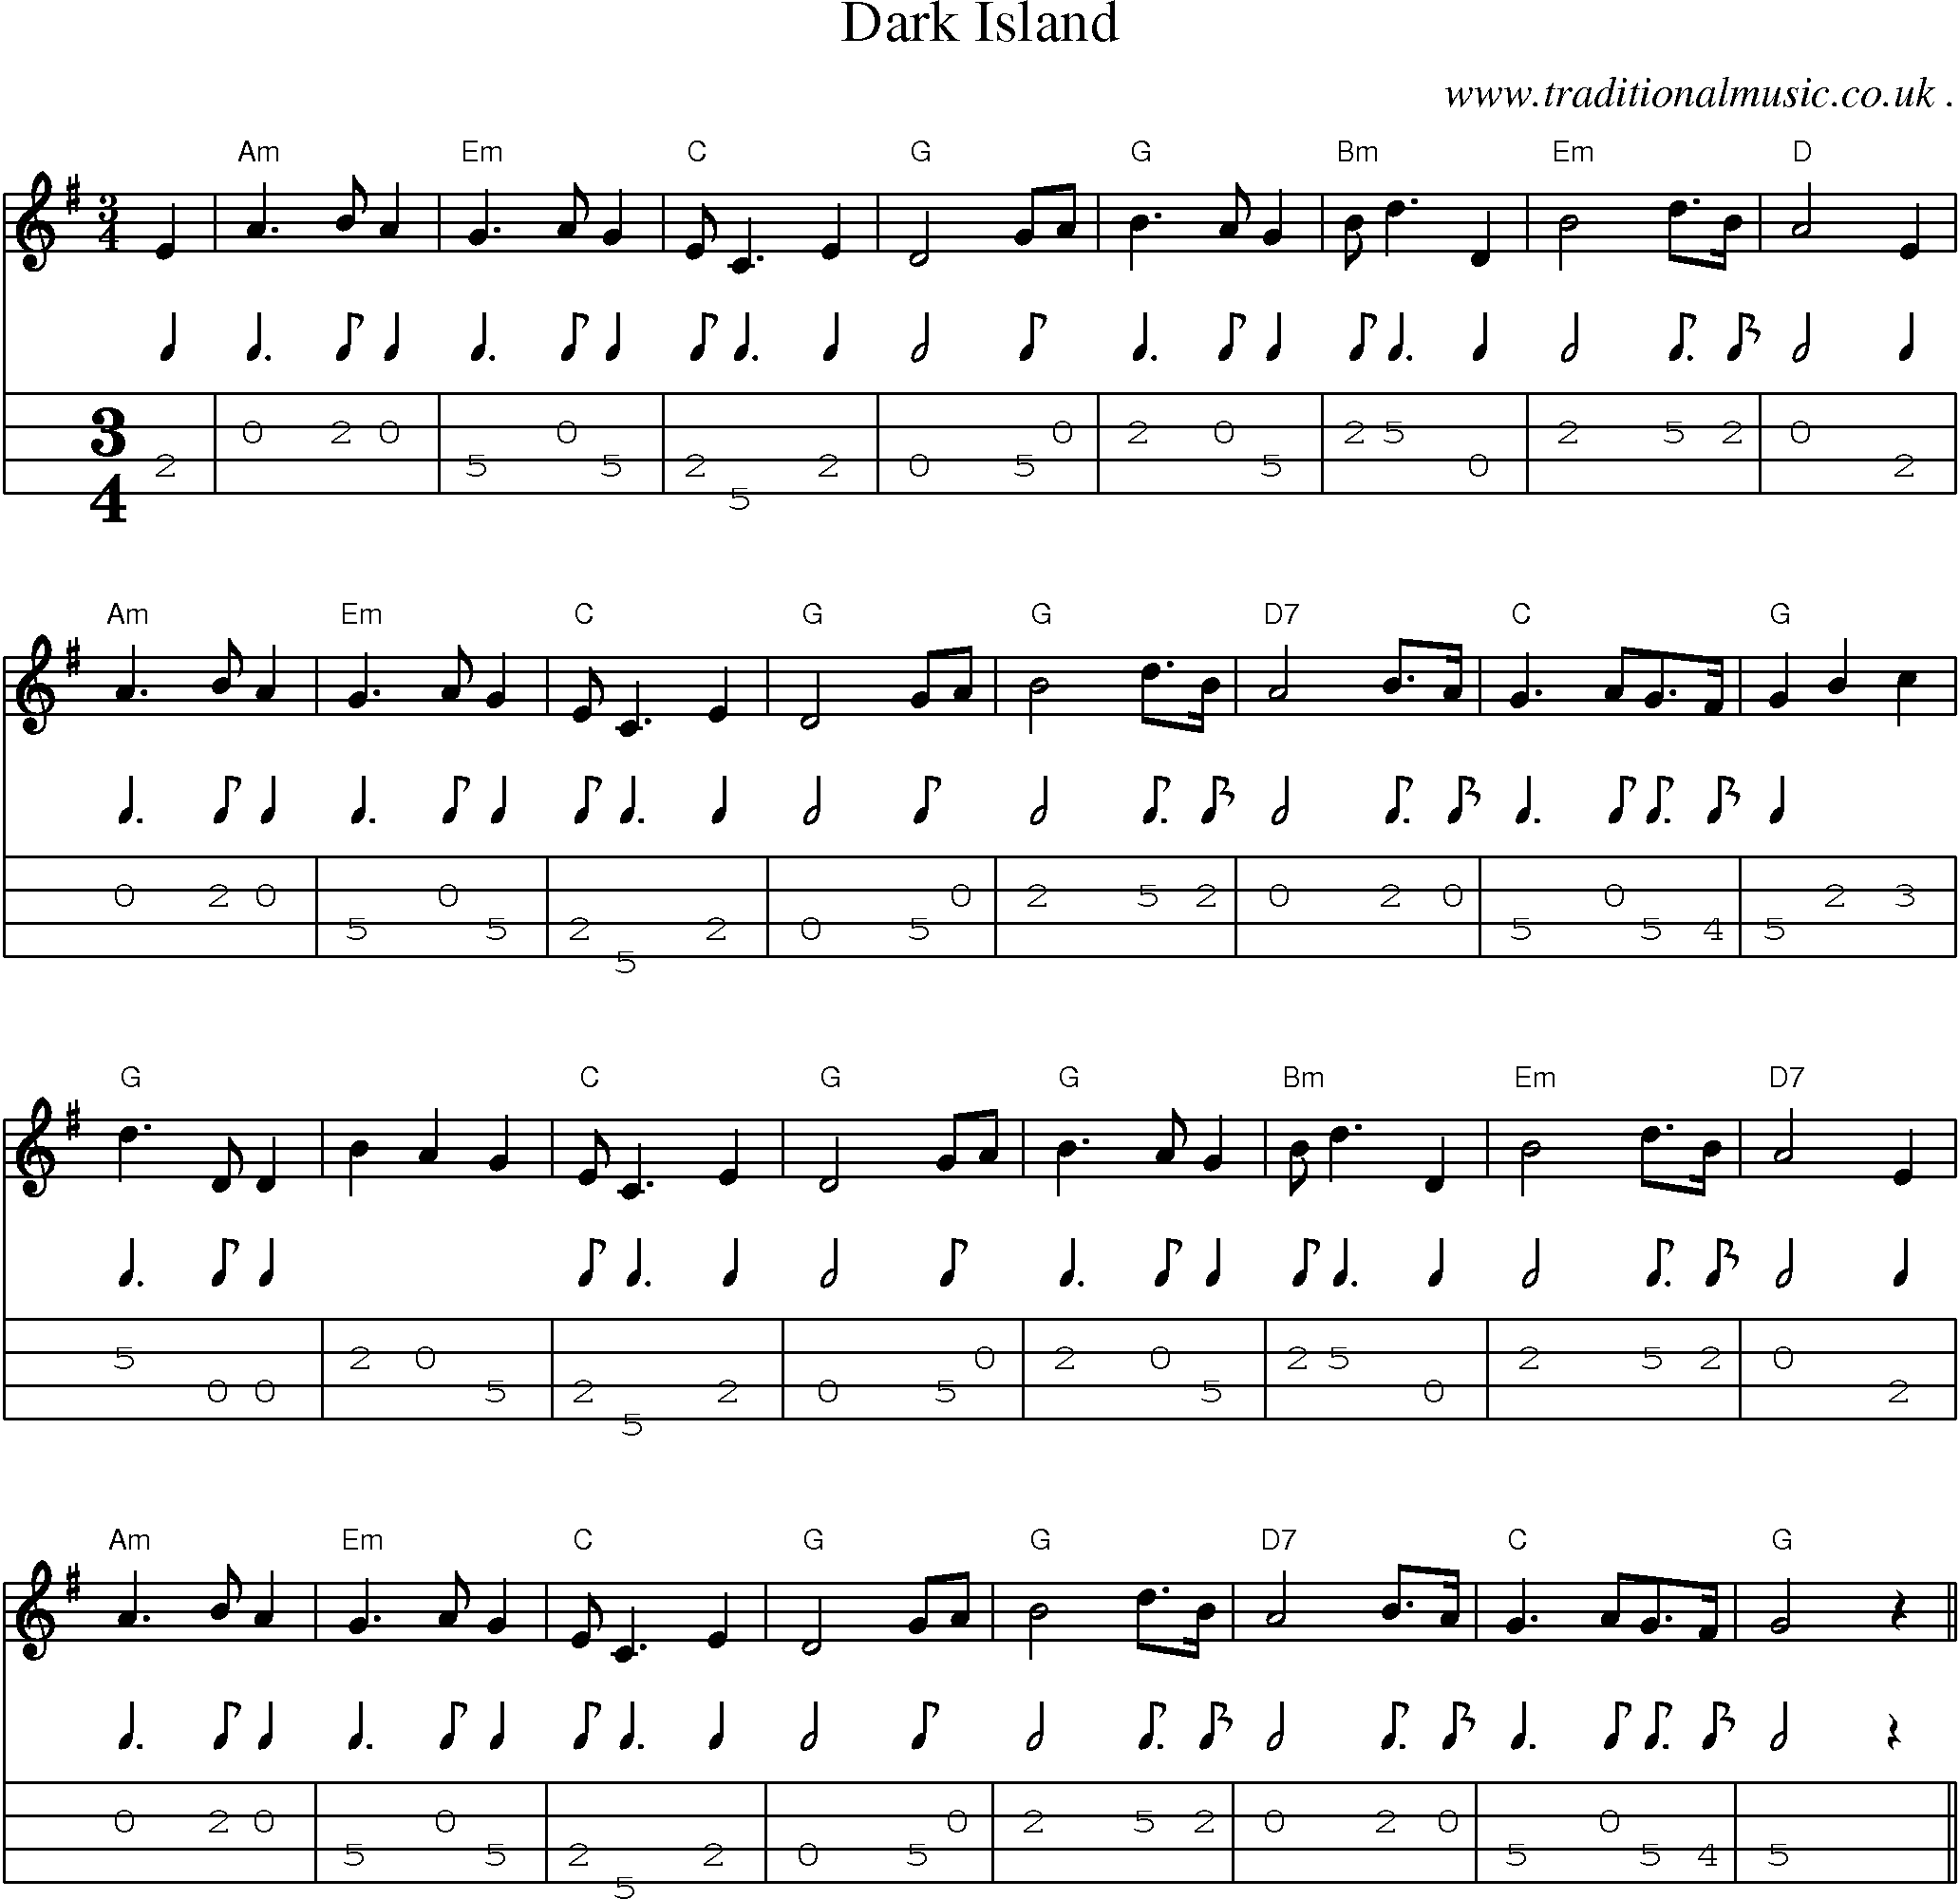 Music Score and Guitar Tabs for Dark Island